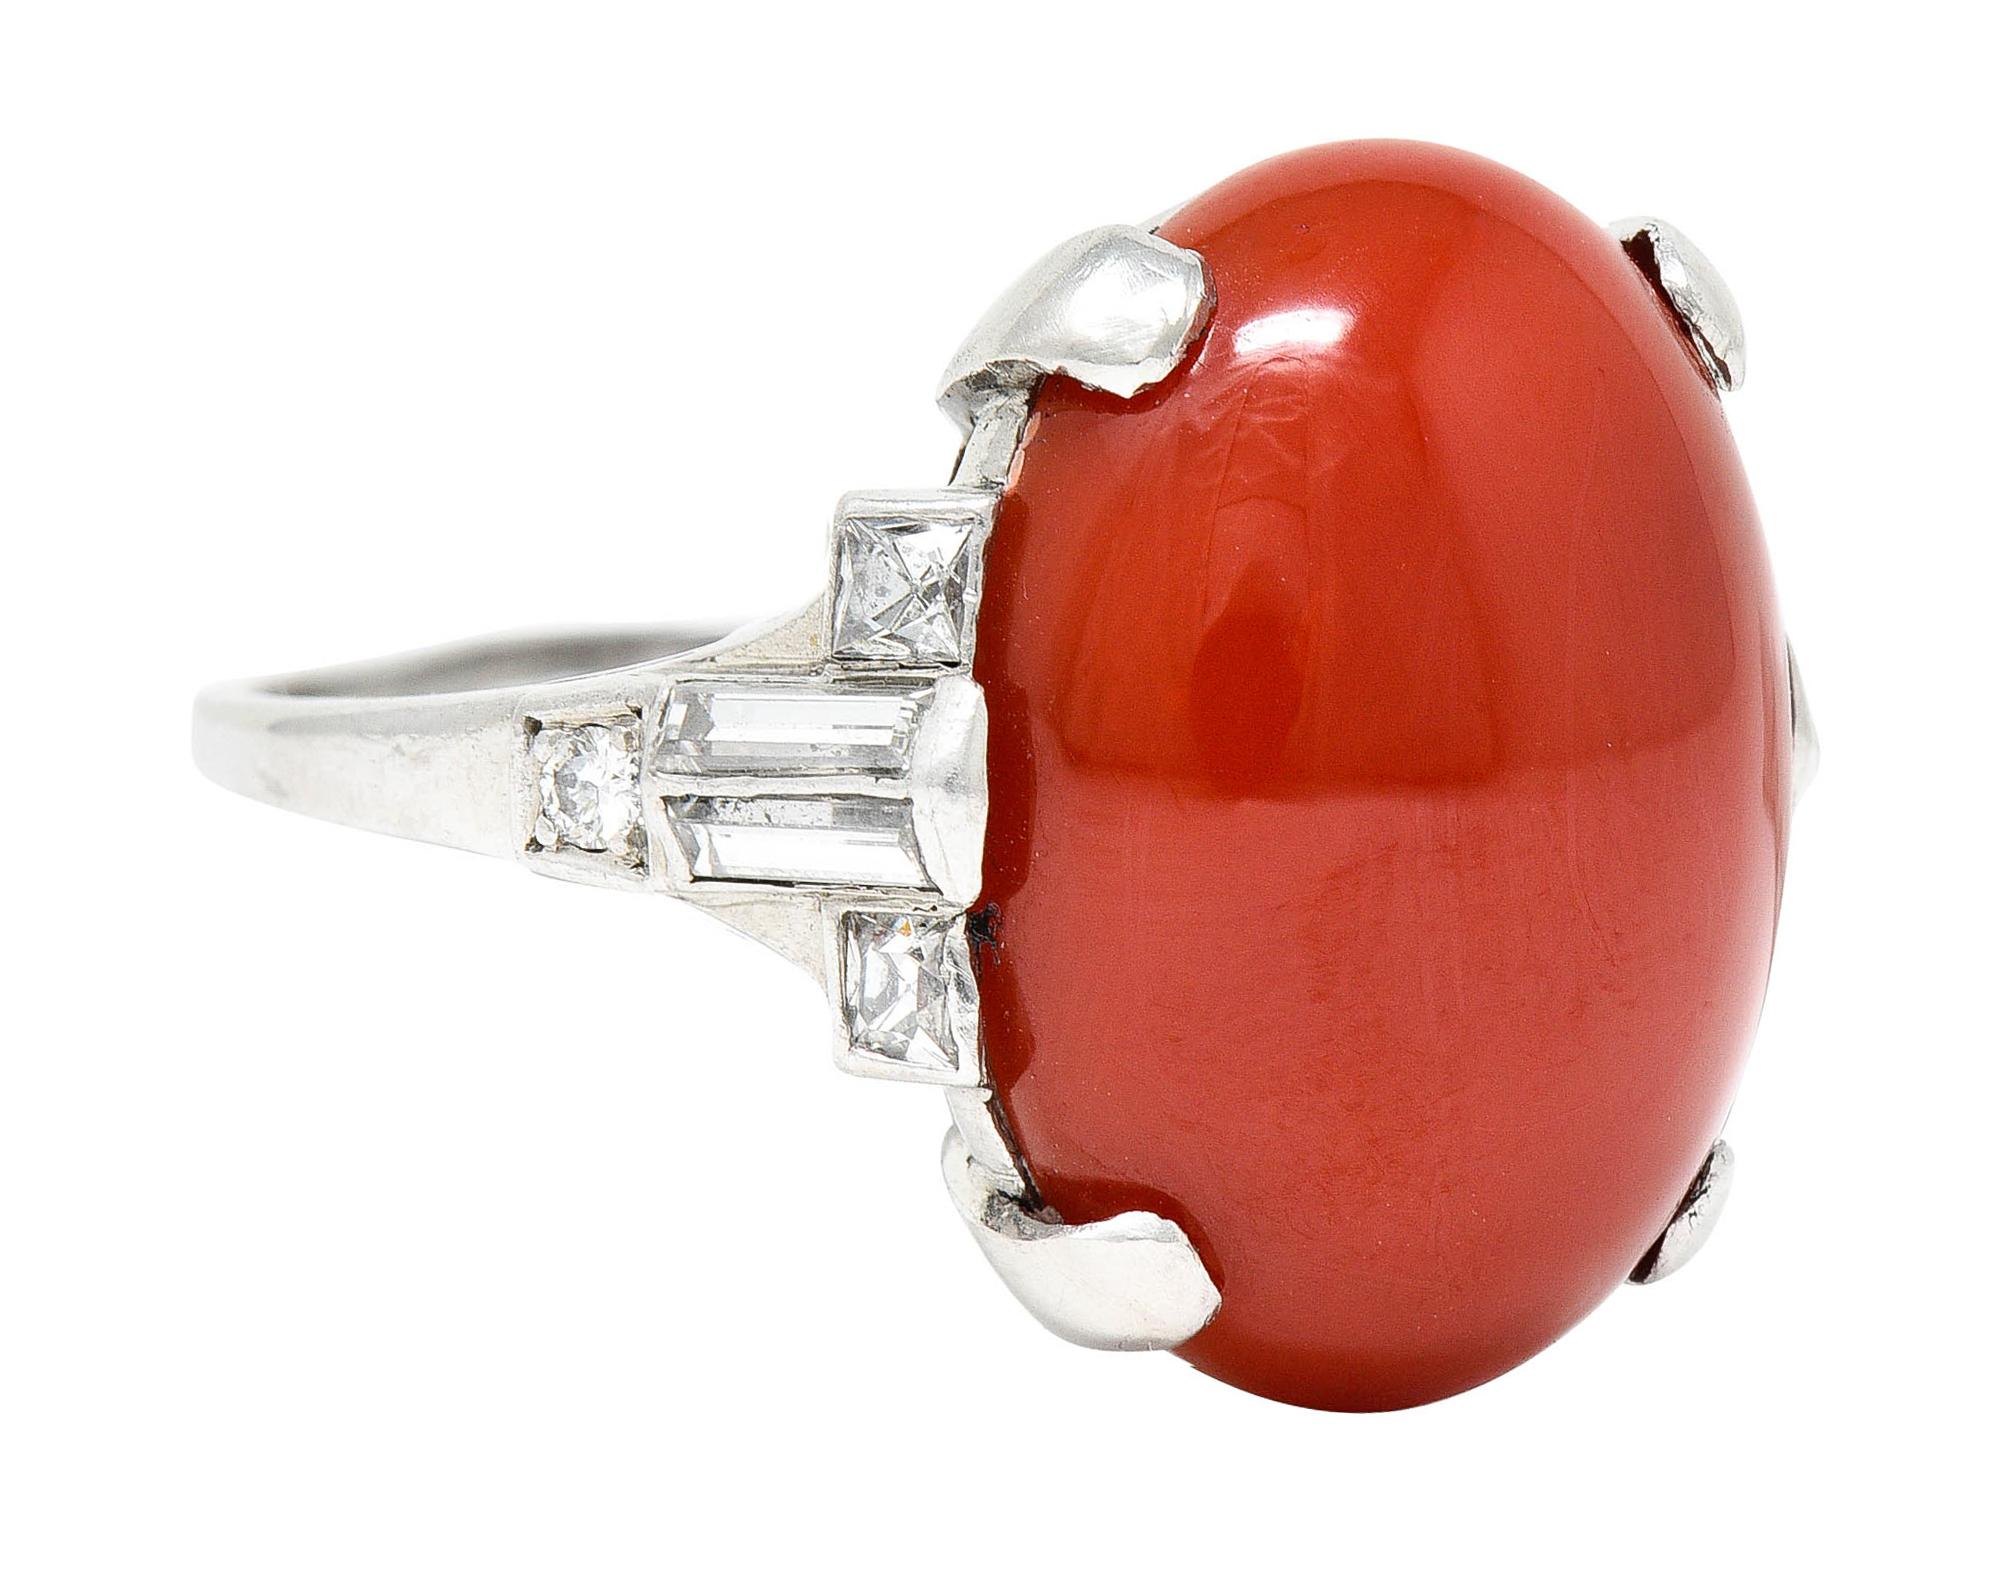 Centering an oval cabochon of coral measuring approximately 19.0 x 14.5 mm

Opaque with slightly orange and vibrantly red color - uniform in distribution

Basket set by wide prongs and flanked by geometric shoulders

Set with baguette, French, and